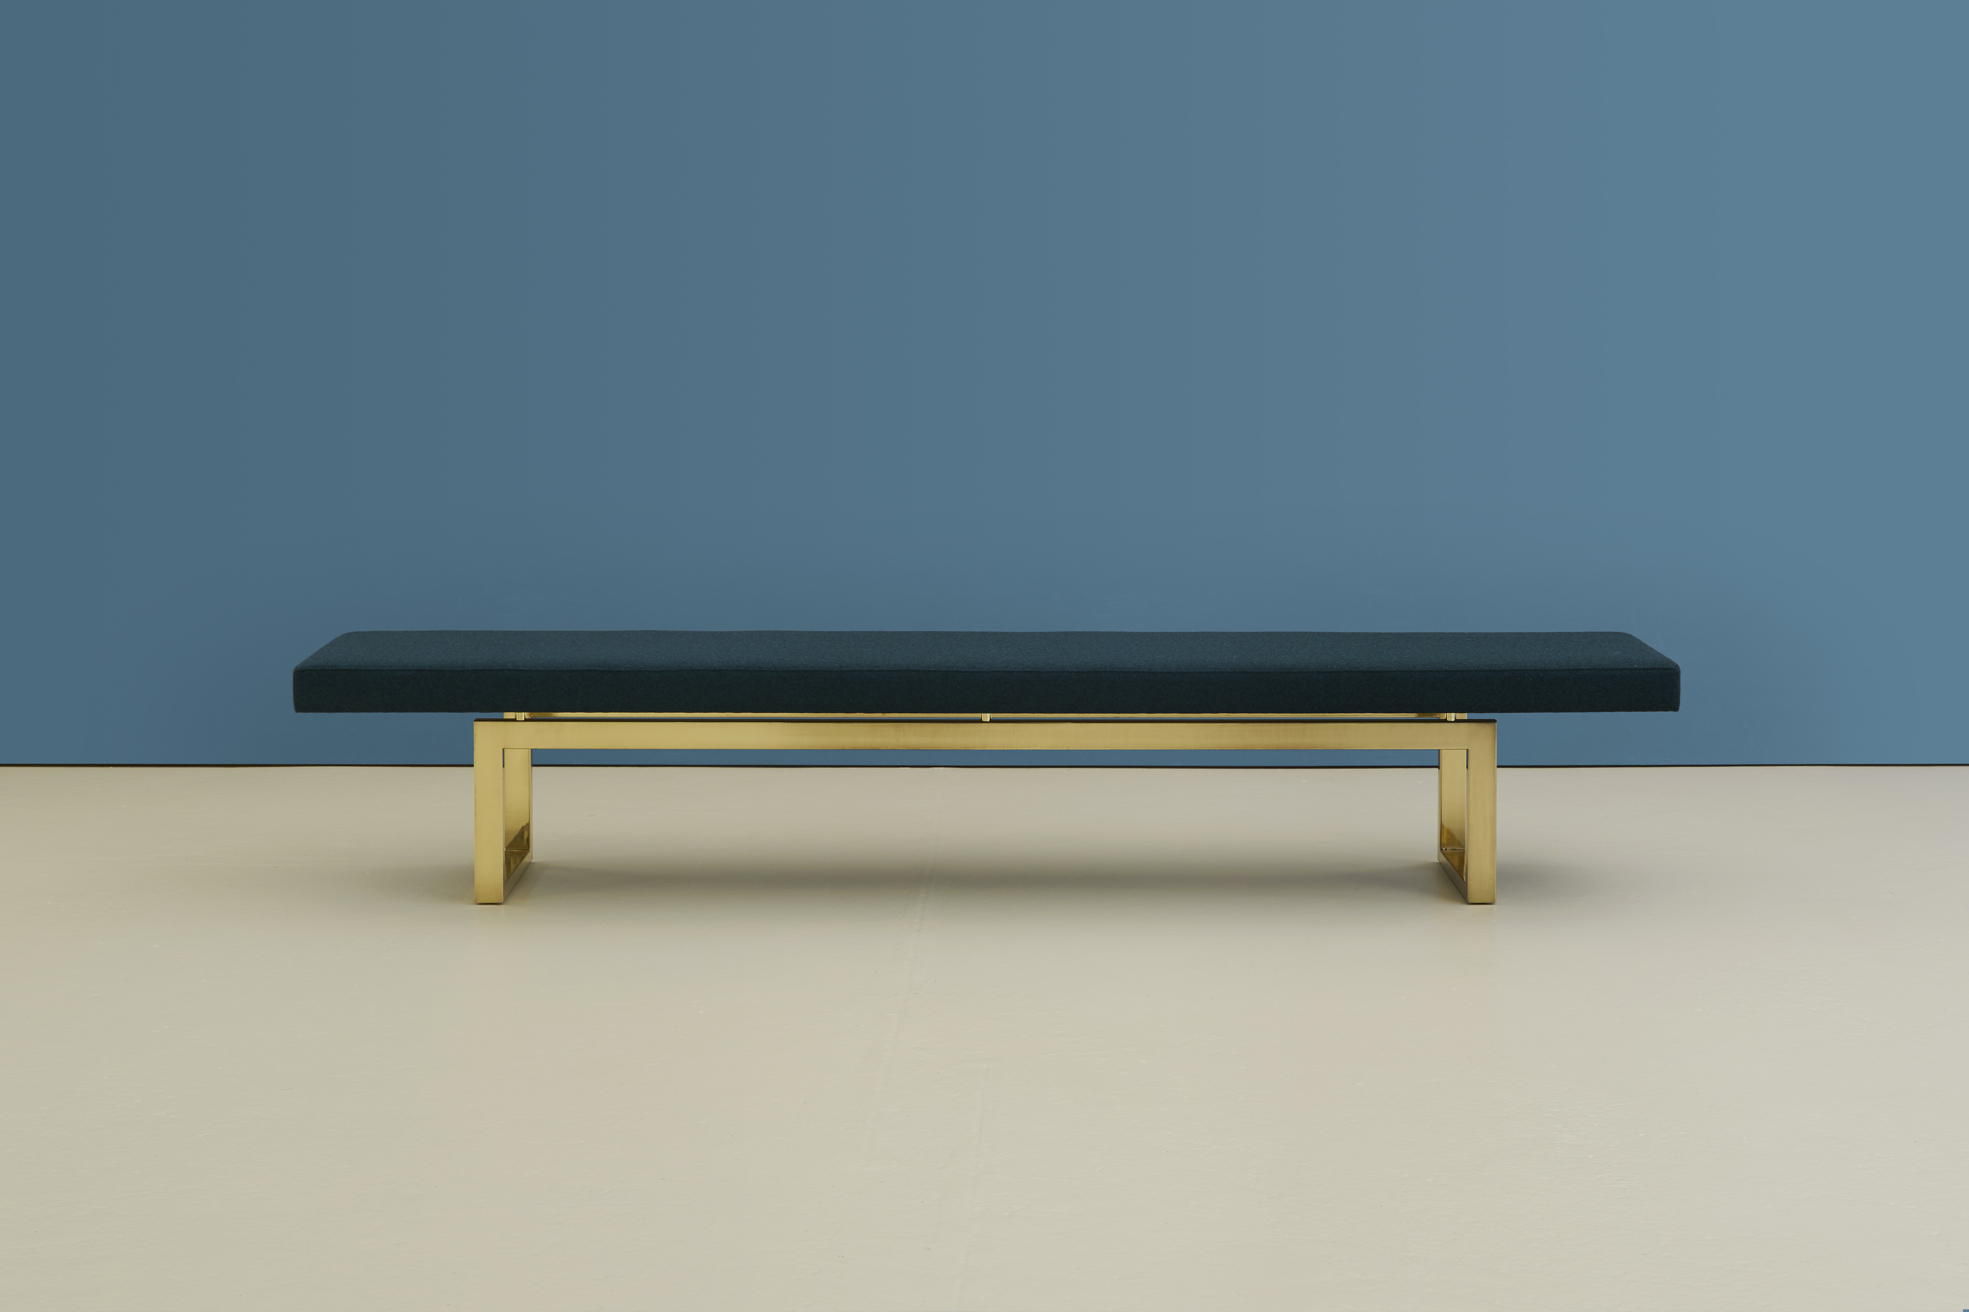 hm106c bench with polished brass base (1) (low res).jpg